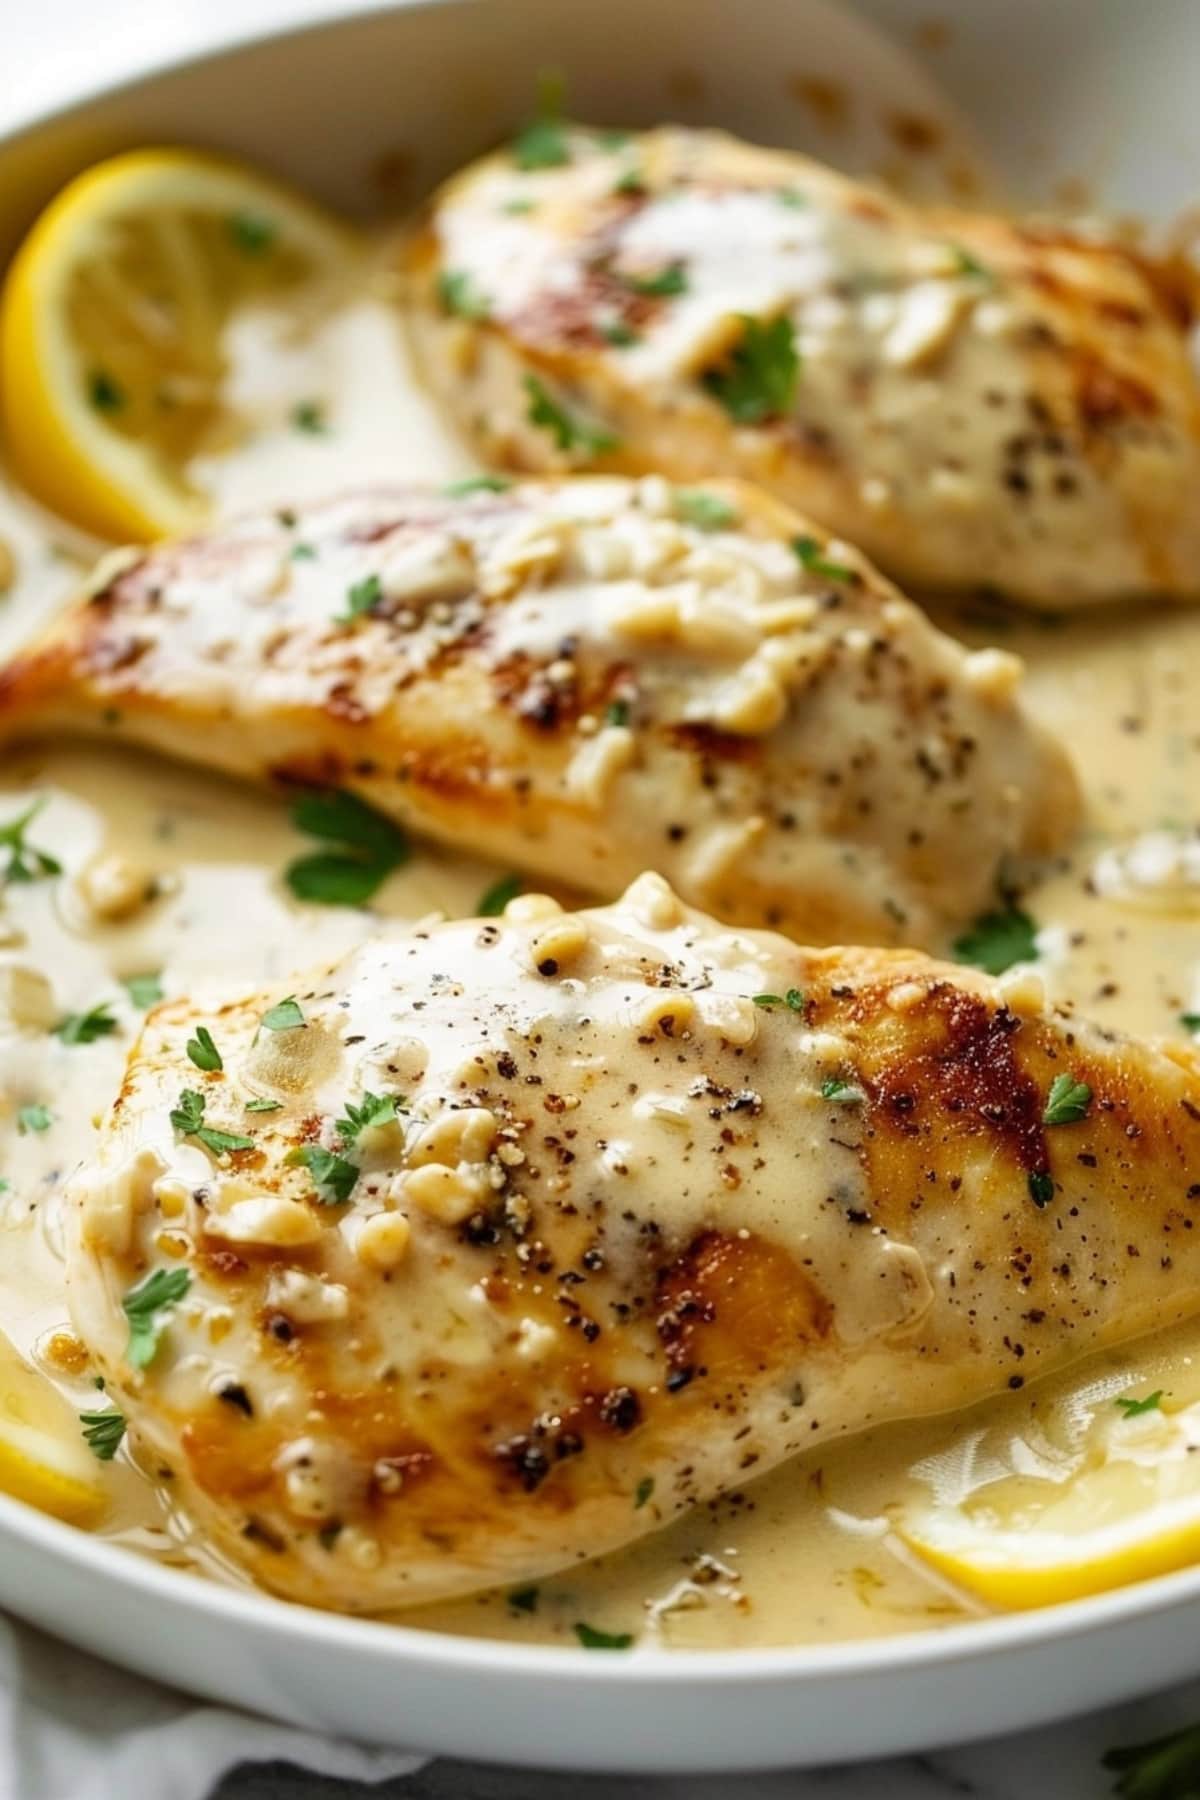 Lemon garlic chicken on a plate served with thick sauce.